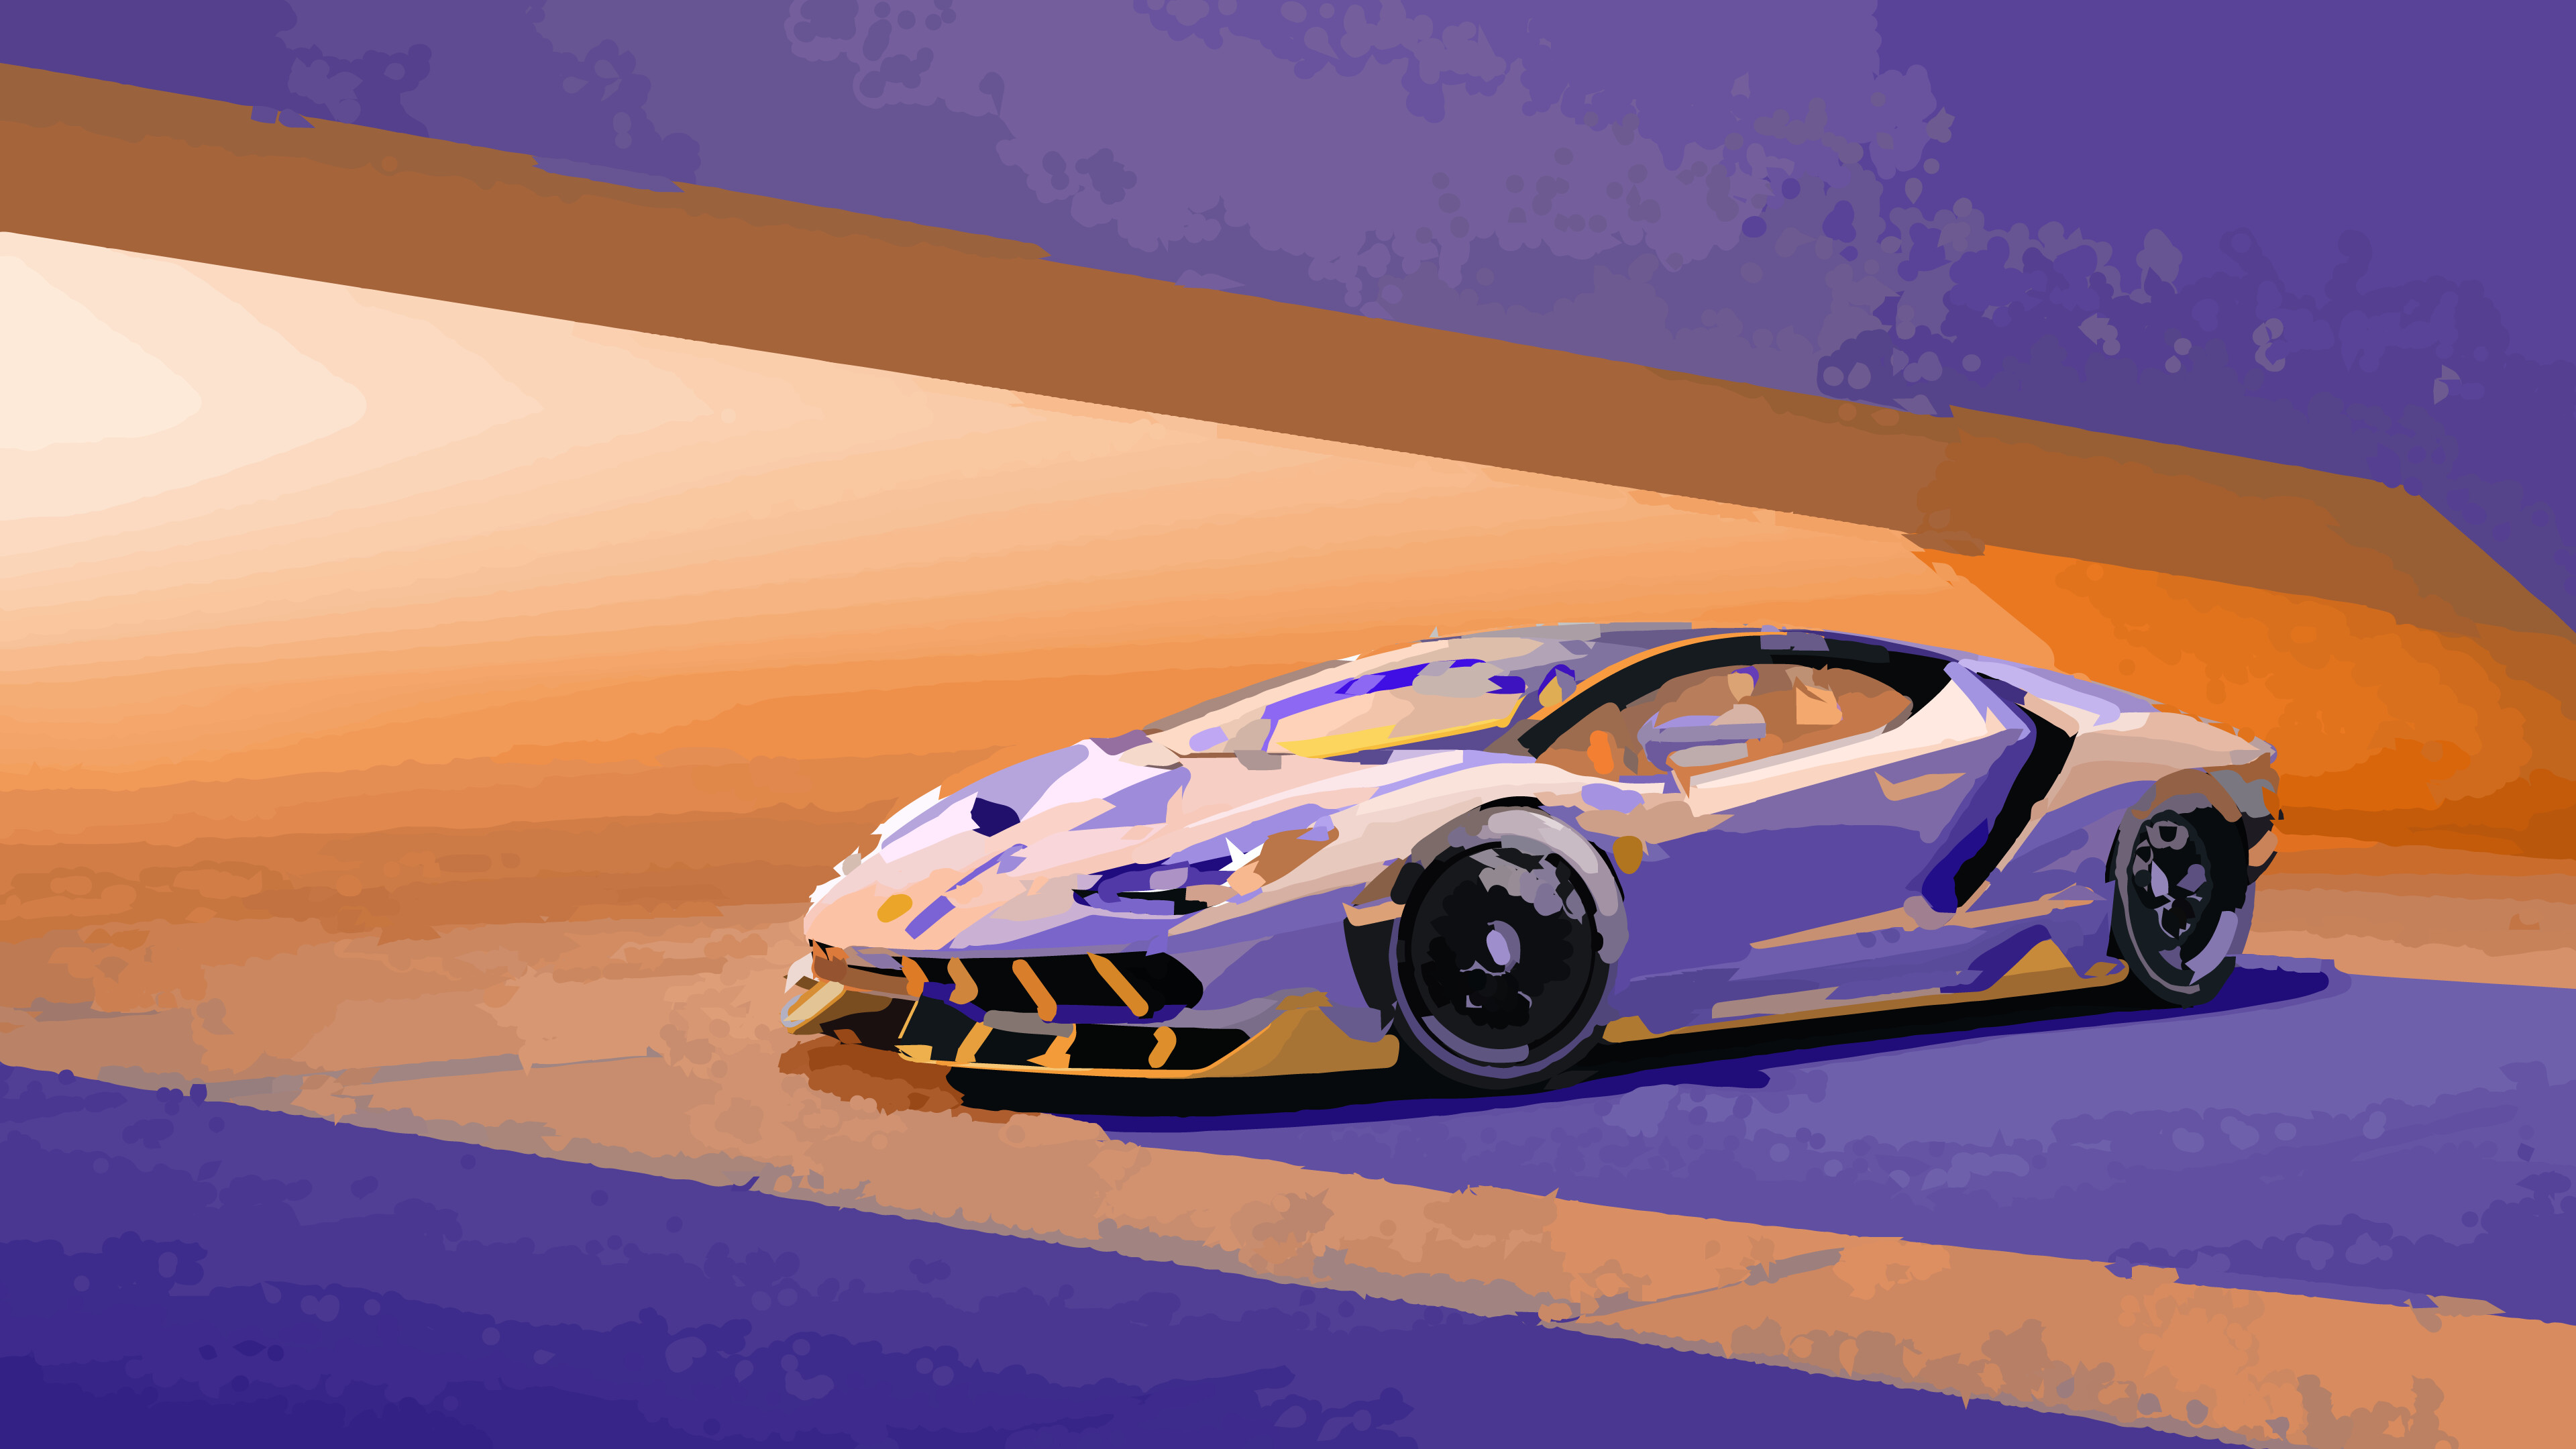 Lamborghini: The company was founded in 1963 to produce grand touring cars. 3840x2160 4K Wallpaper.